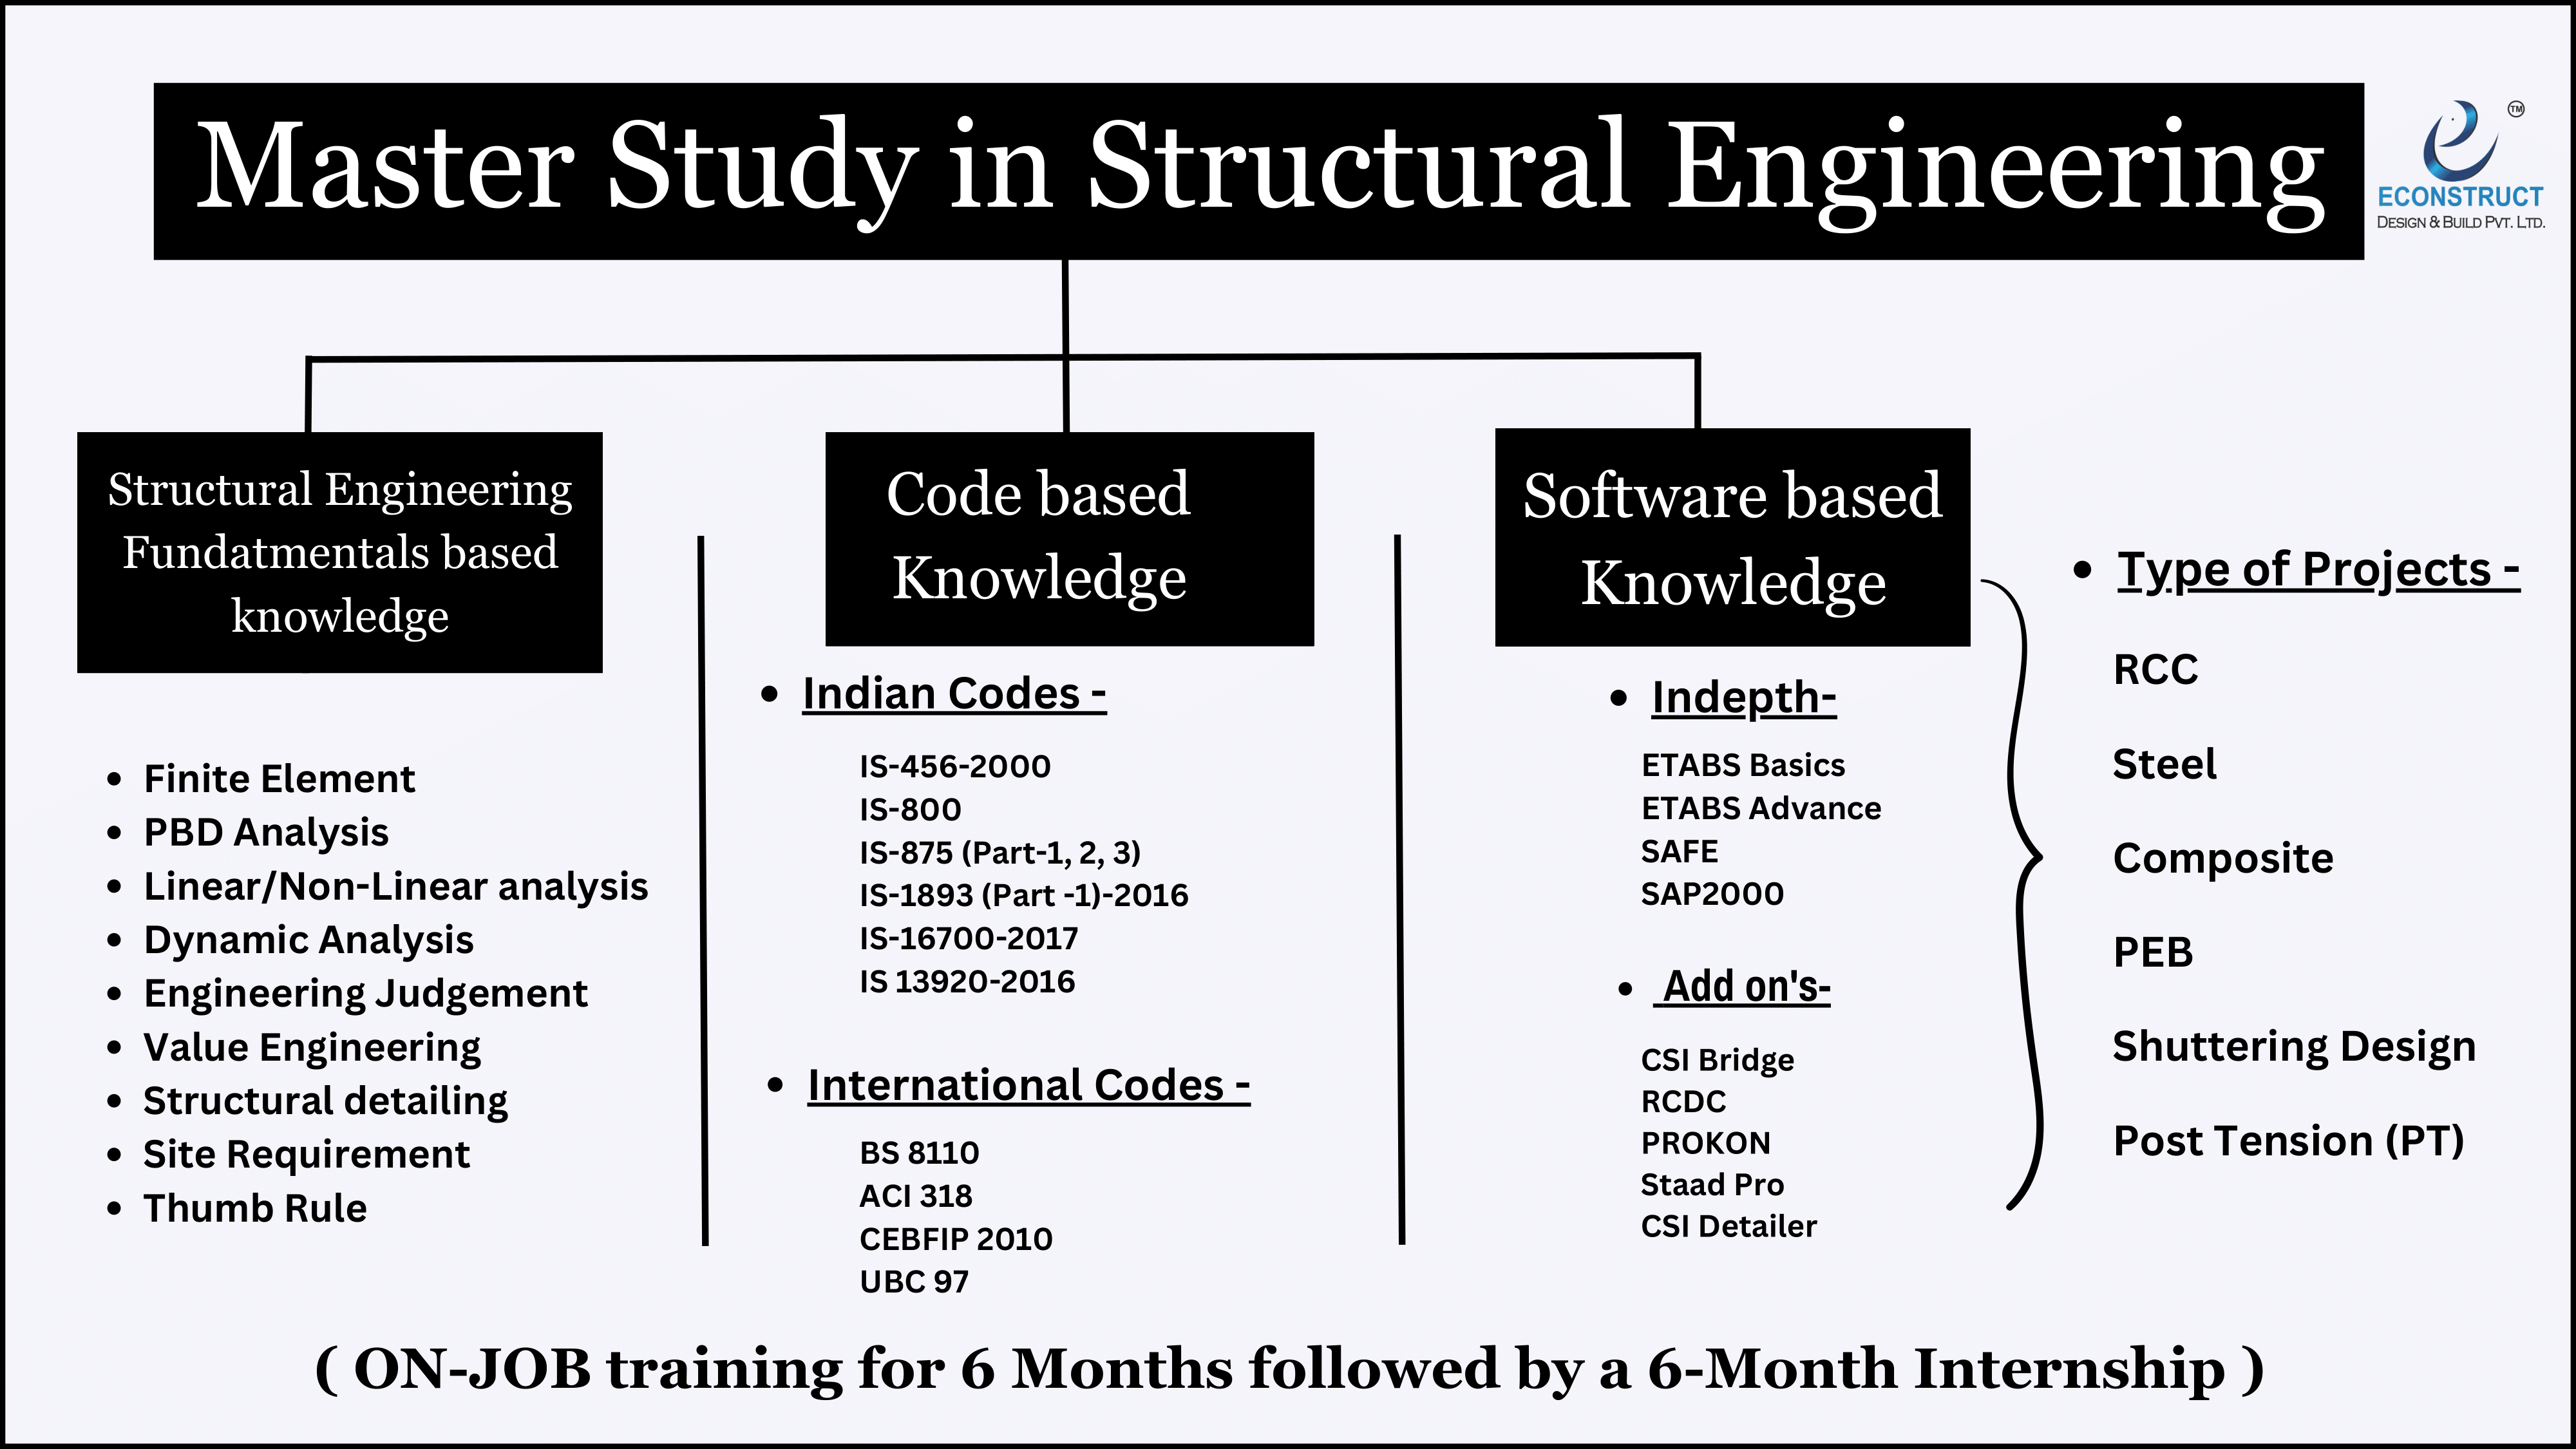 Structural Engineering 1 structural engineering,structural consultancy,econstruct,master study in structures